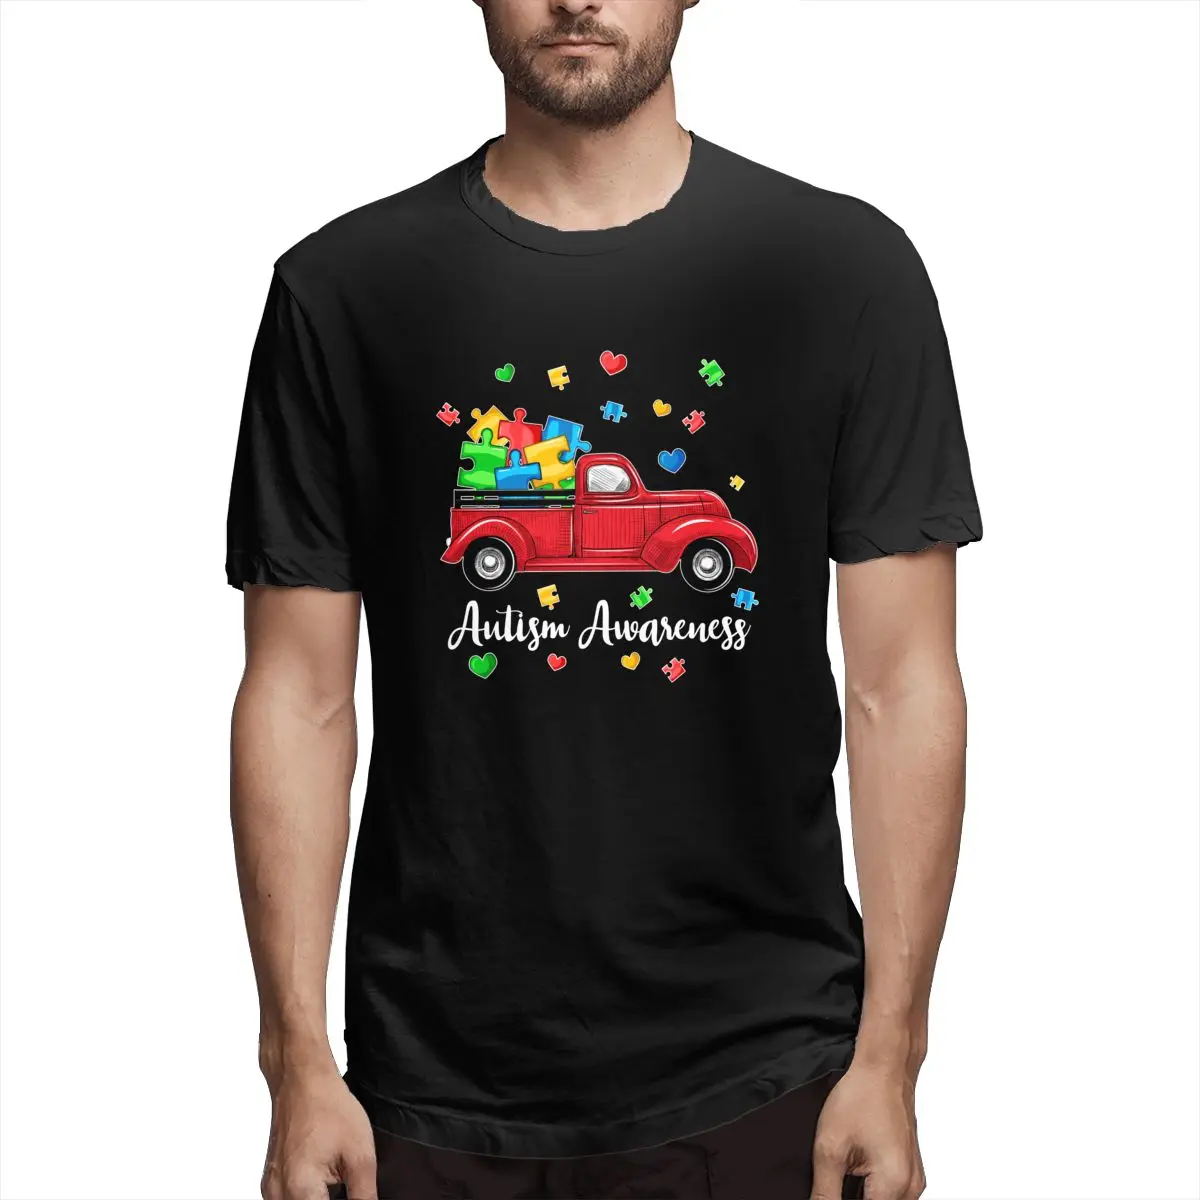 Red Truck Autism Puzzle Pieces Autism Awareness Graphic Tee Men's Short Sleeve T-shirt Funny Cotton Tops